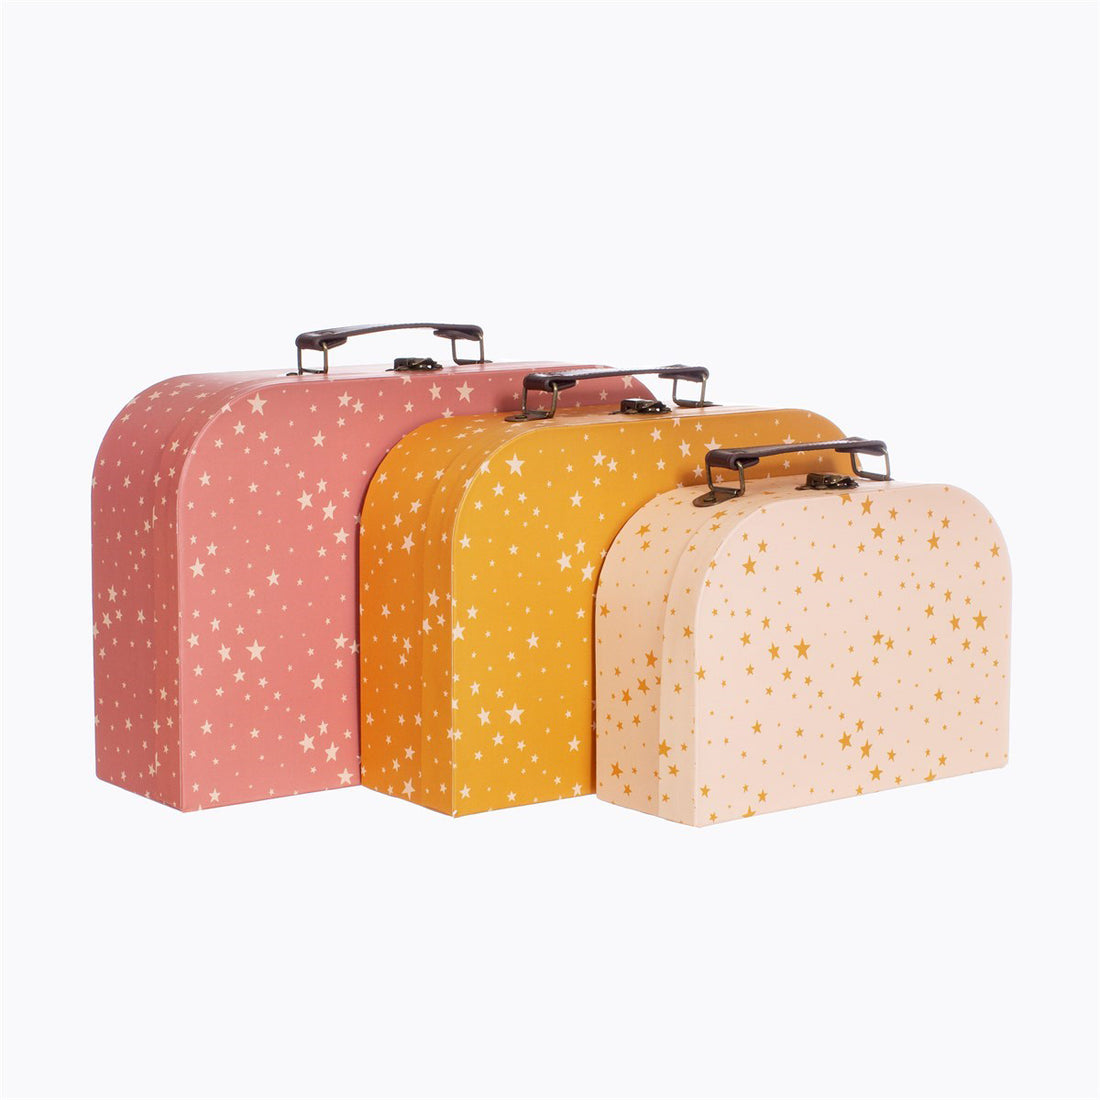 rjb-stone-little-stars-suitcases-rjbs-gif110 (3)